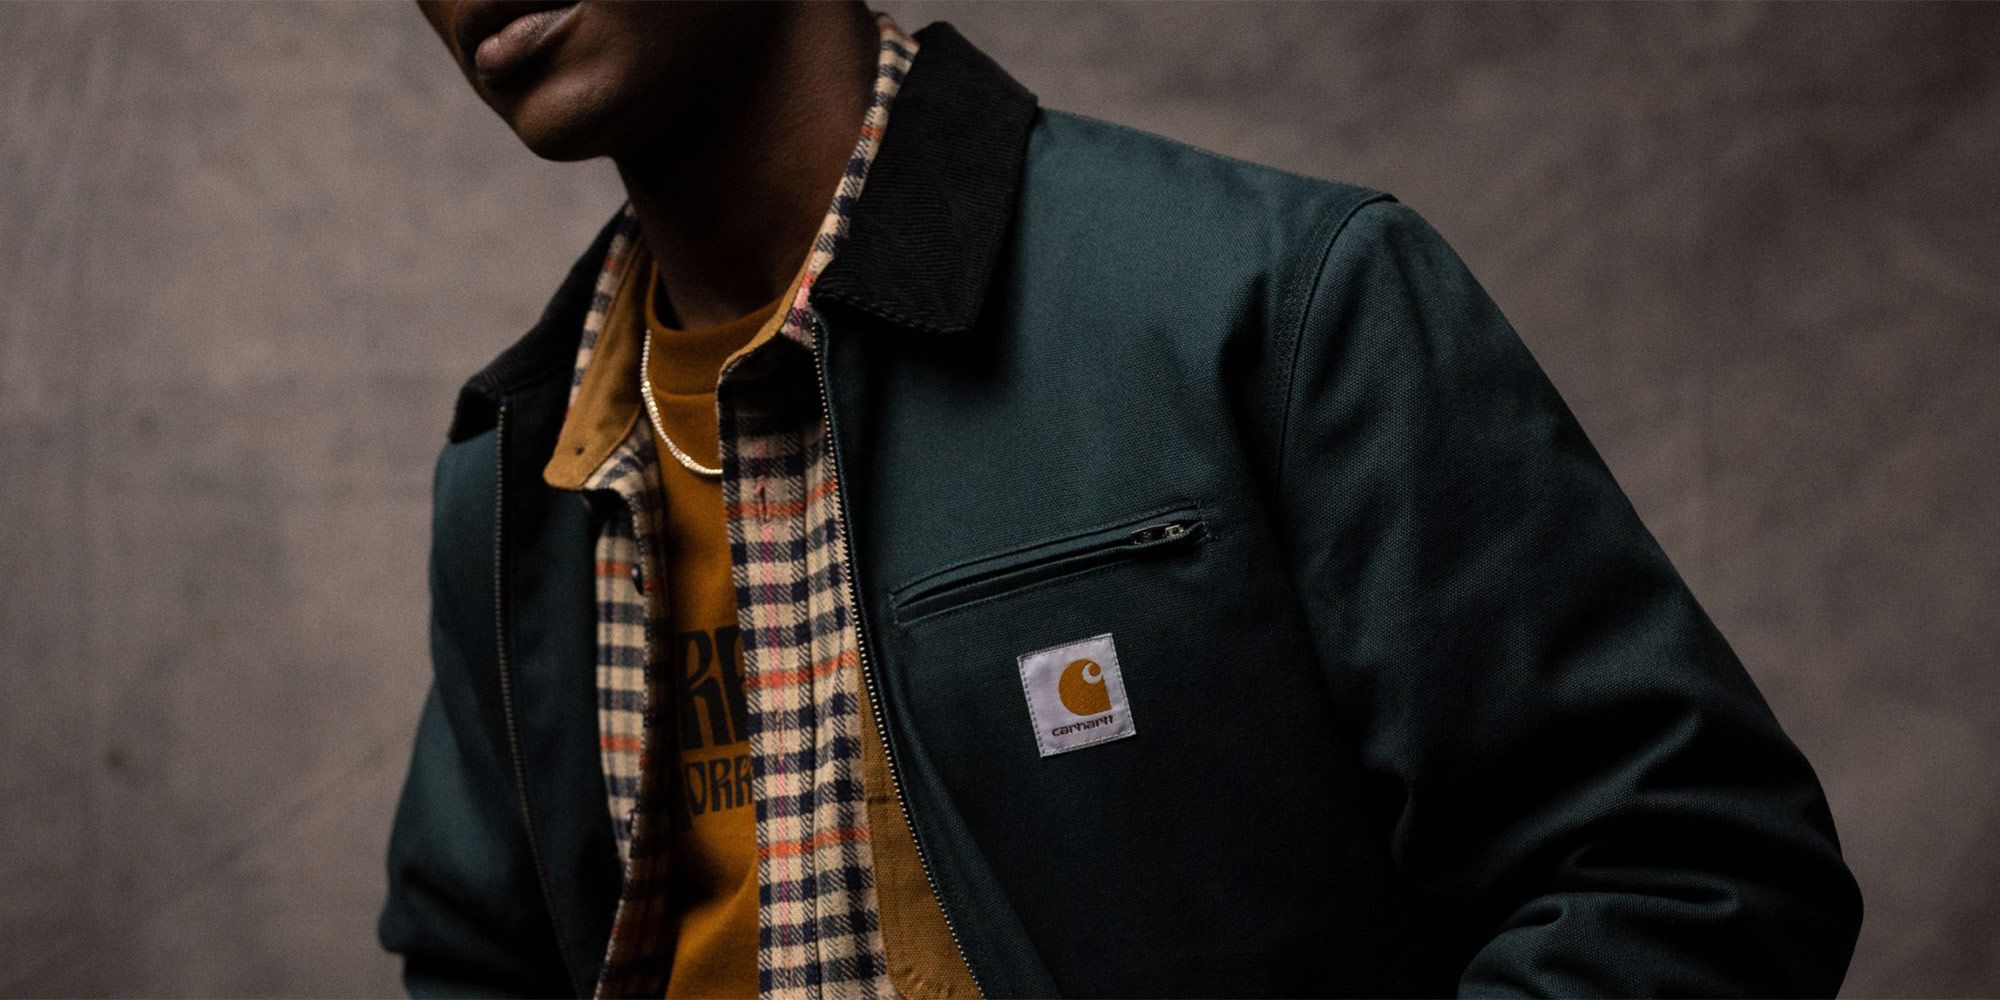 Carhartt Detroit Jacket Review: A Garment Made for Michigan Winters